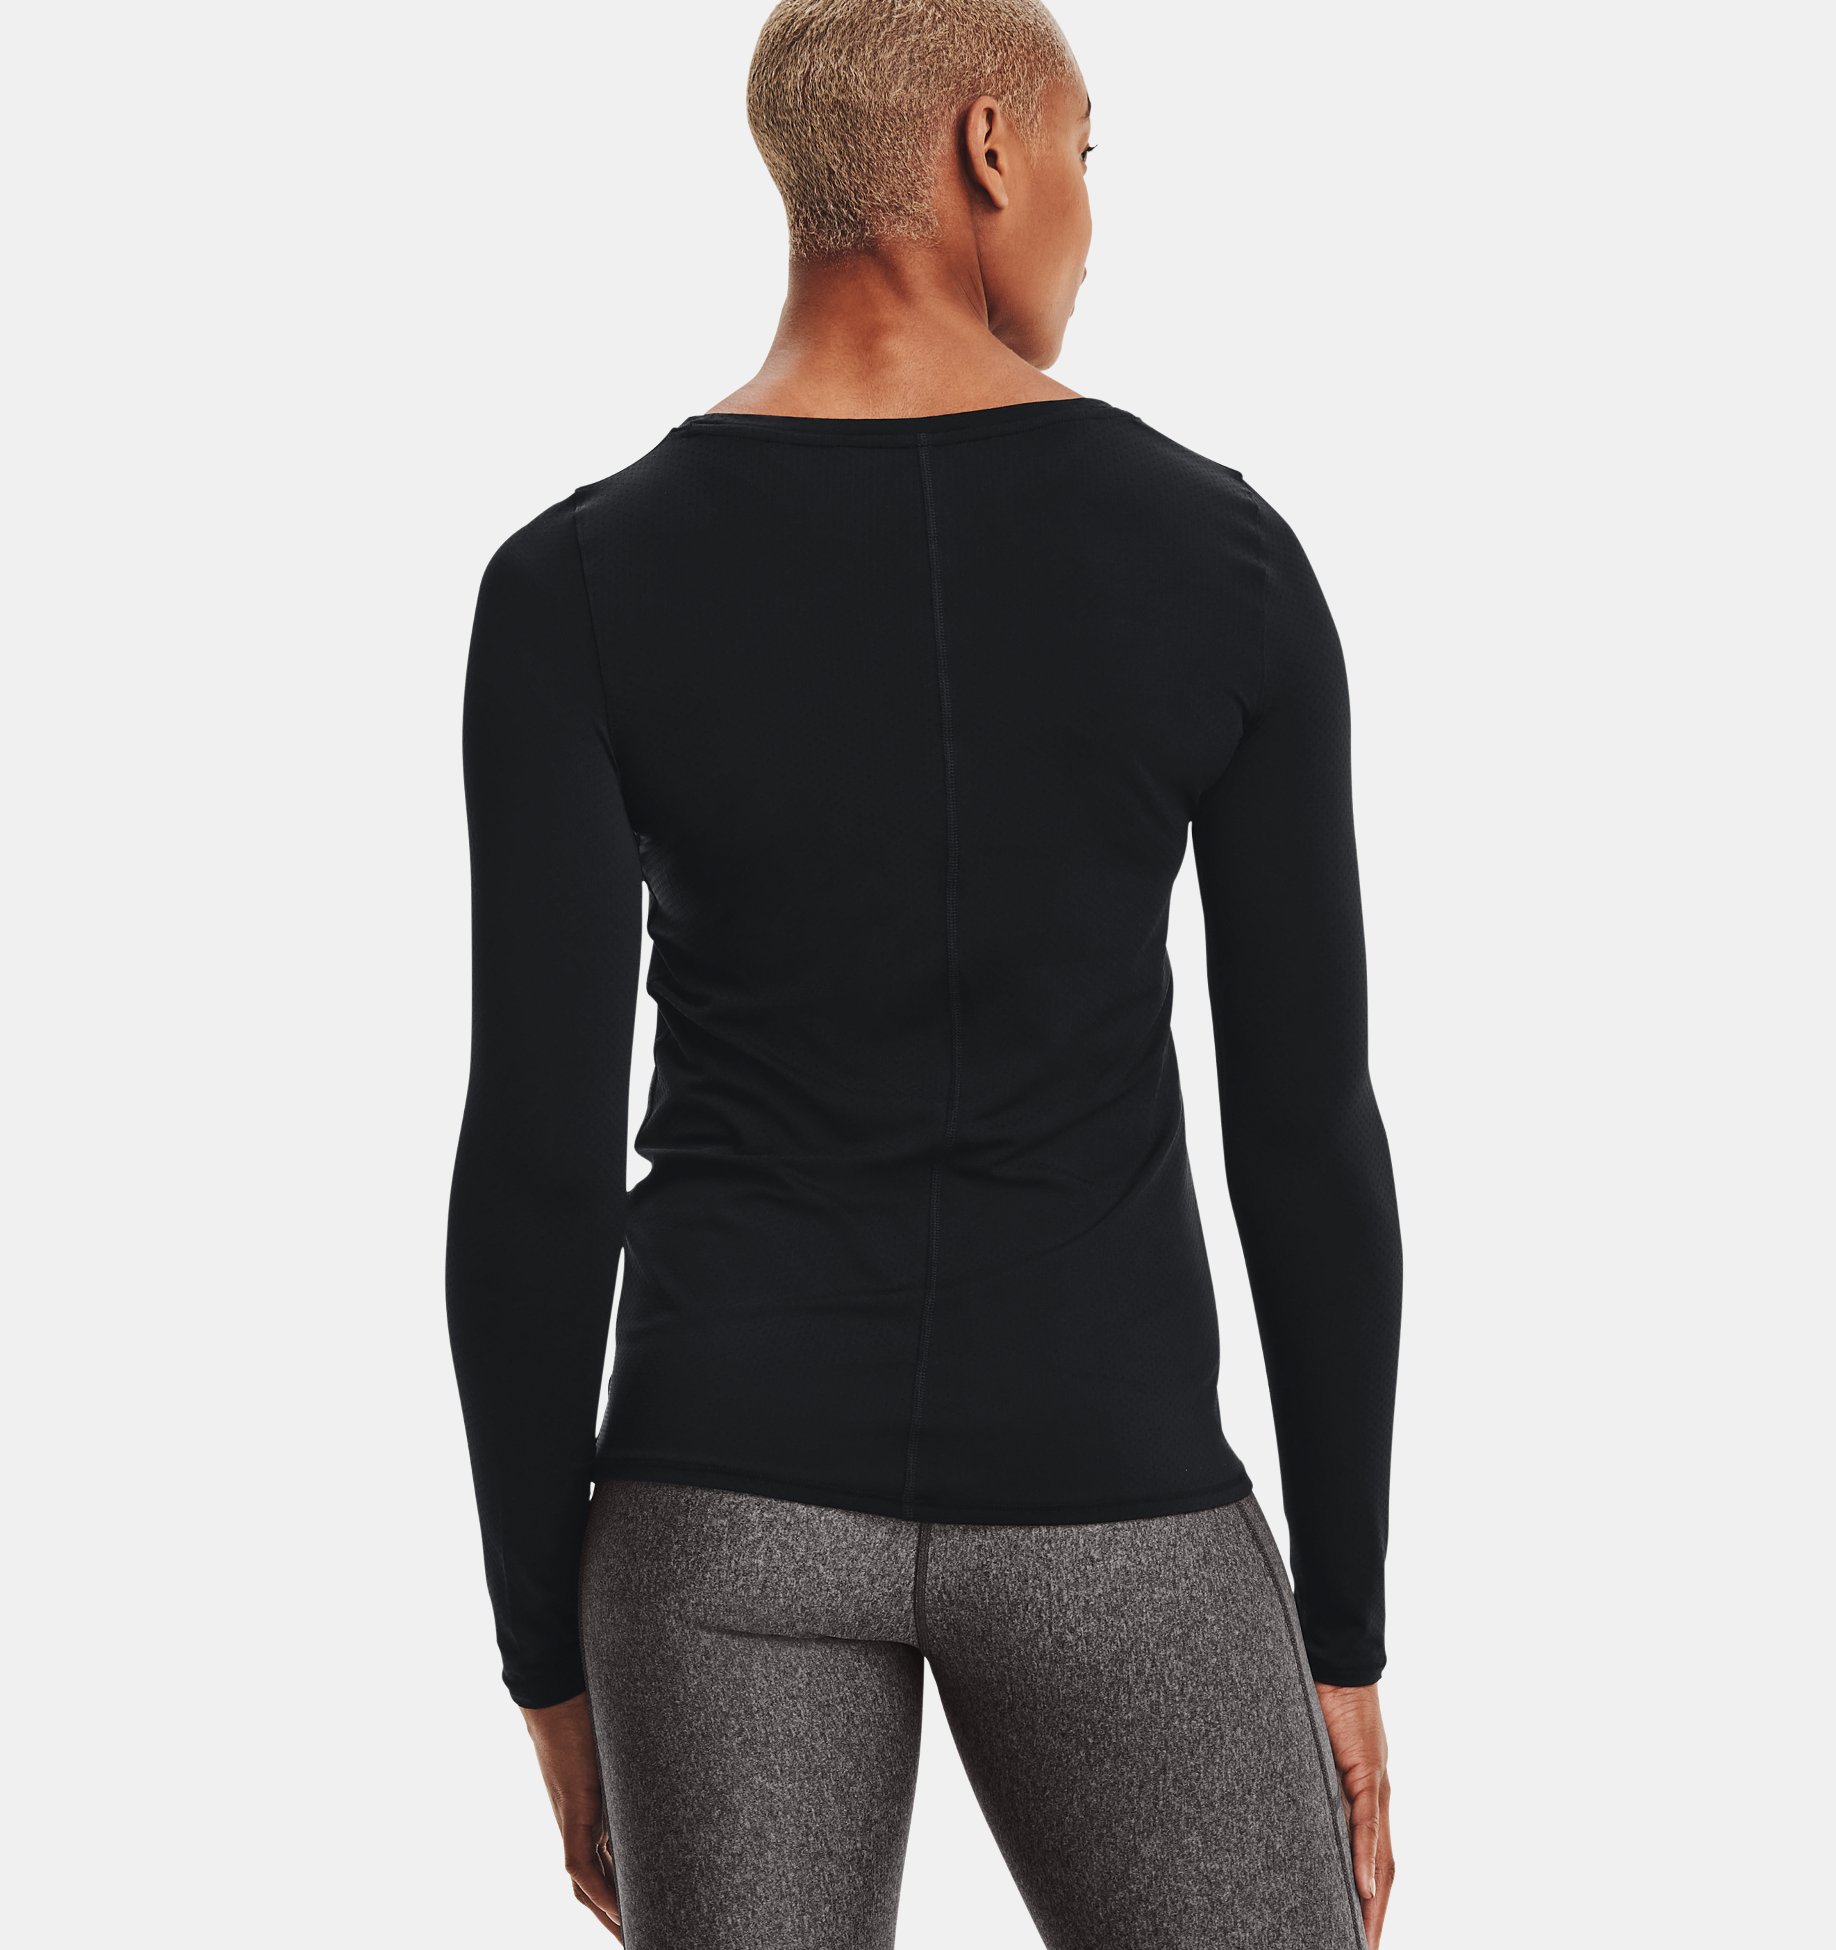 Small /White Visiter la boutique Under ArmourUnder Armour Women's HeatGear Compression Long-Sleeve T-Shirt Black 001 